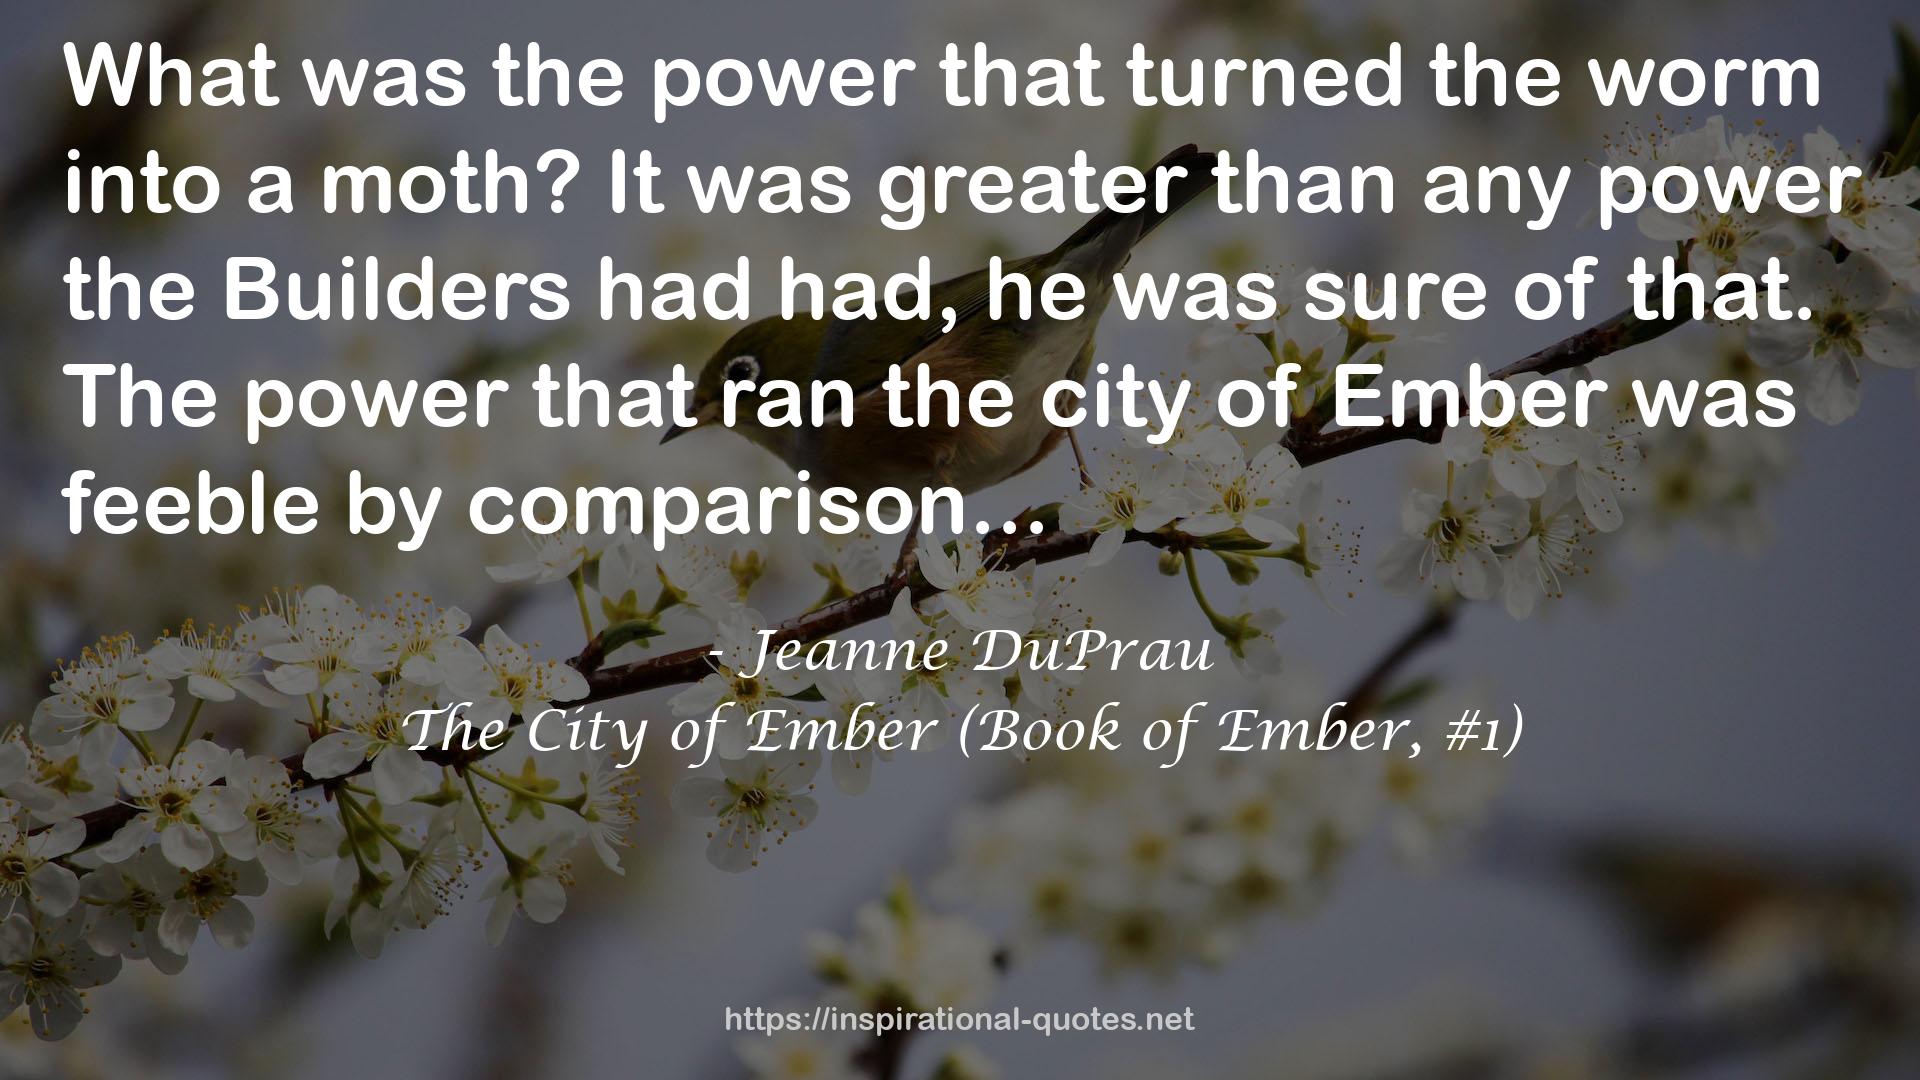 The City of Ember (Book of Ember, #1) QUOTES